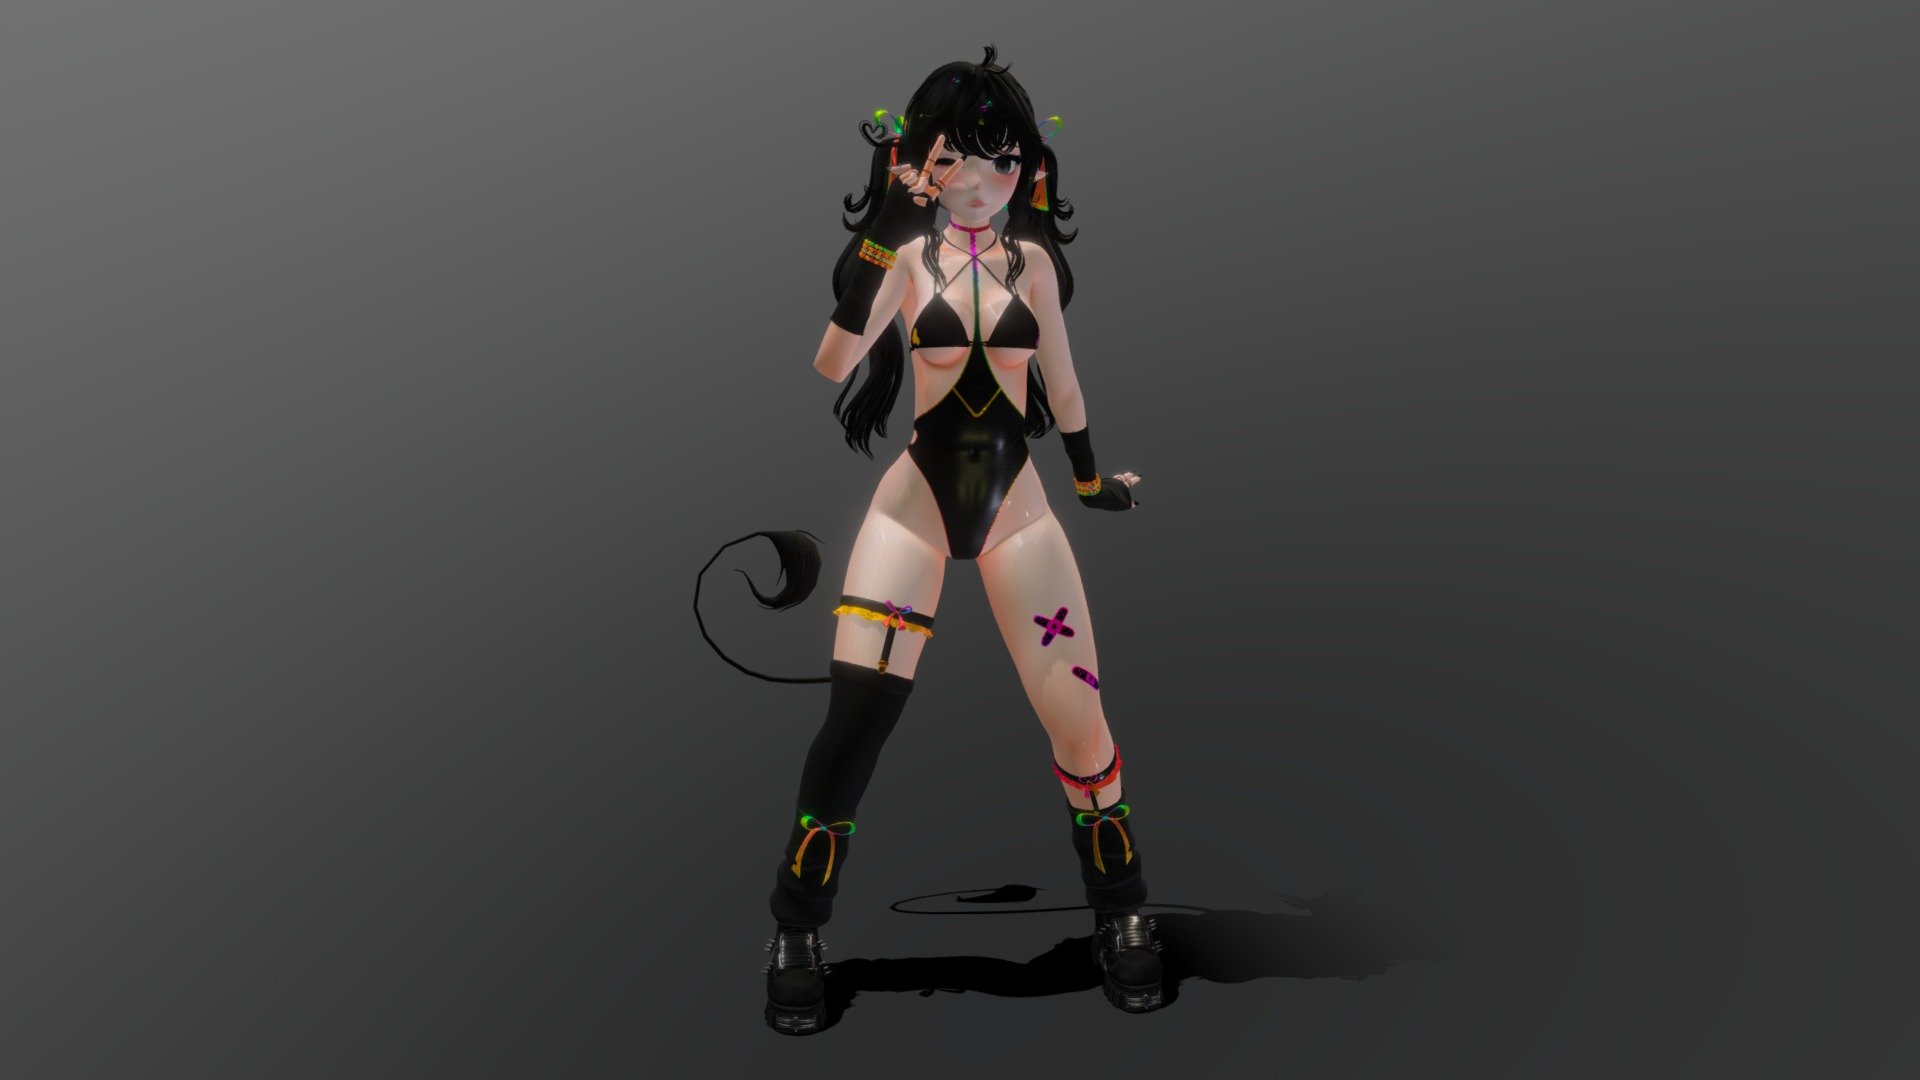 This a preview of my avatar Aria Hope ya'll enjoy! ❤️
If you'd like to see more of my progress n making of assets n avatars be sure to join my Discord: https://discord.gg/u2APZHGezK and Twitter: https://twitter.com/Ana_Ram1515 - ~Aria~ - 3D model by Ana_Ram1515 3d model